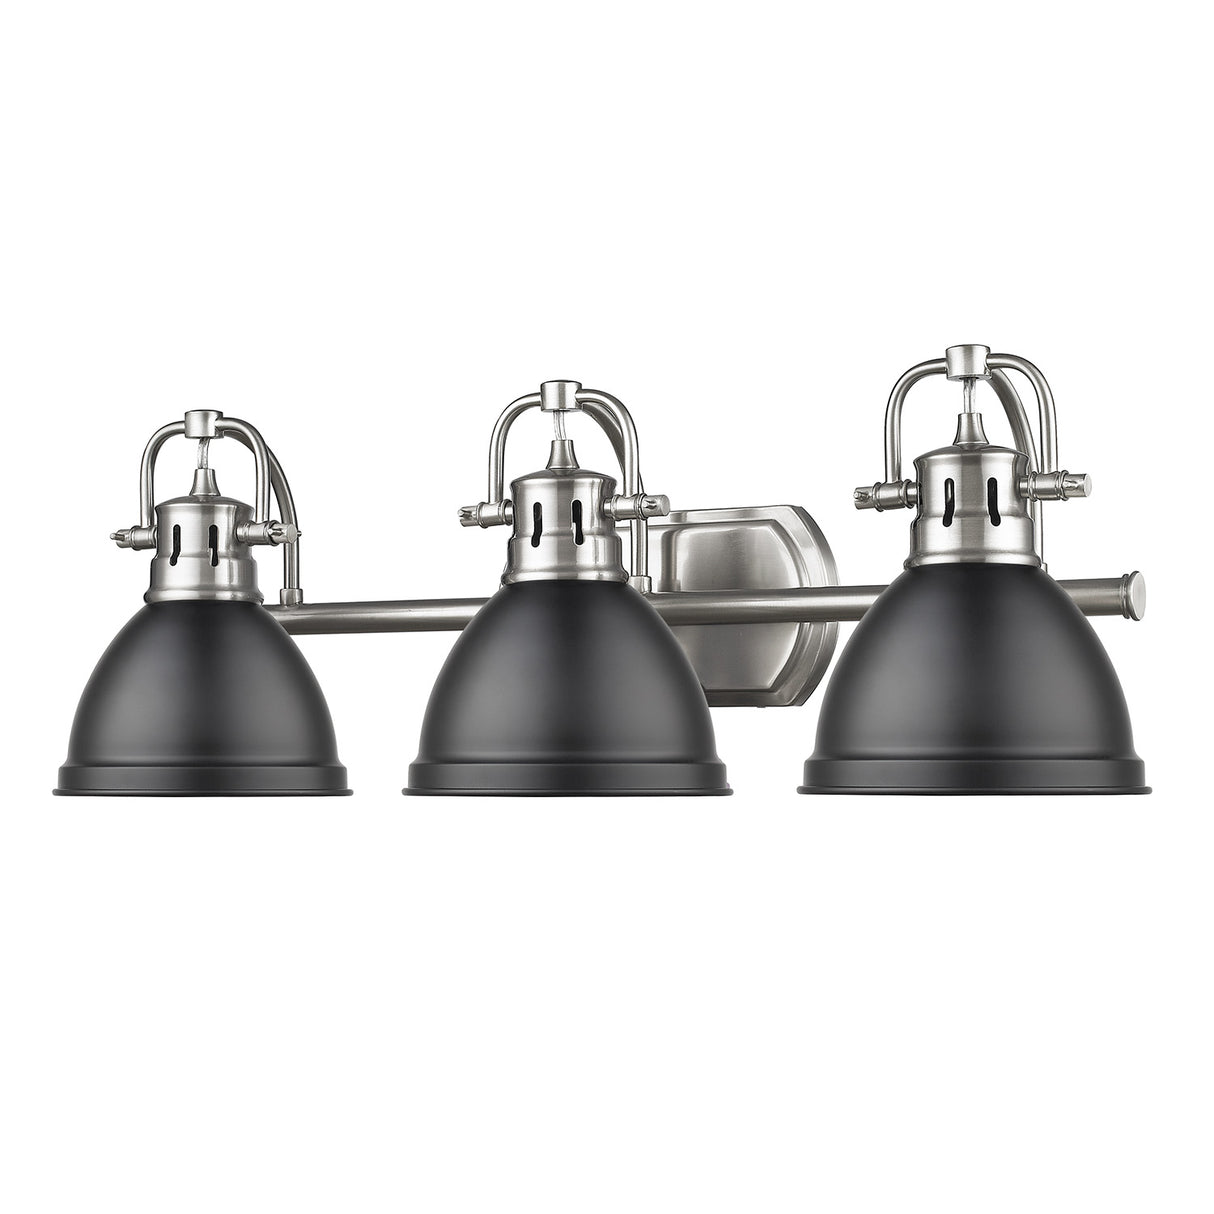 Duncan 3 Light Bath Vanity in Pewter with a Matte Black Shade